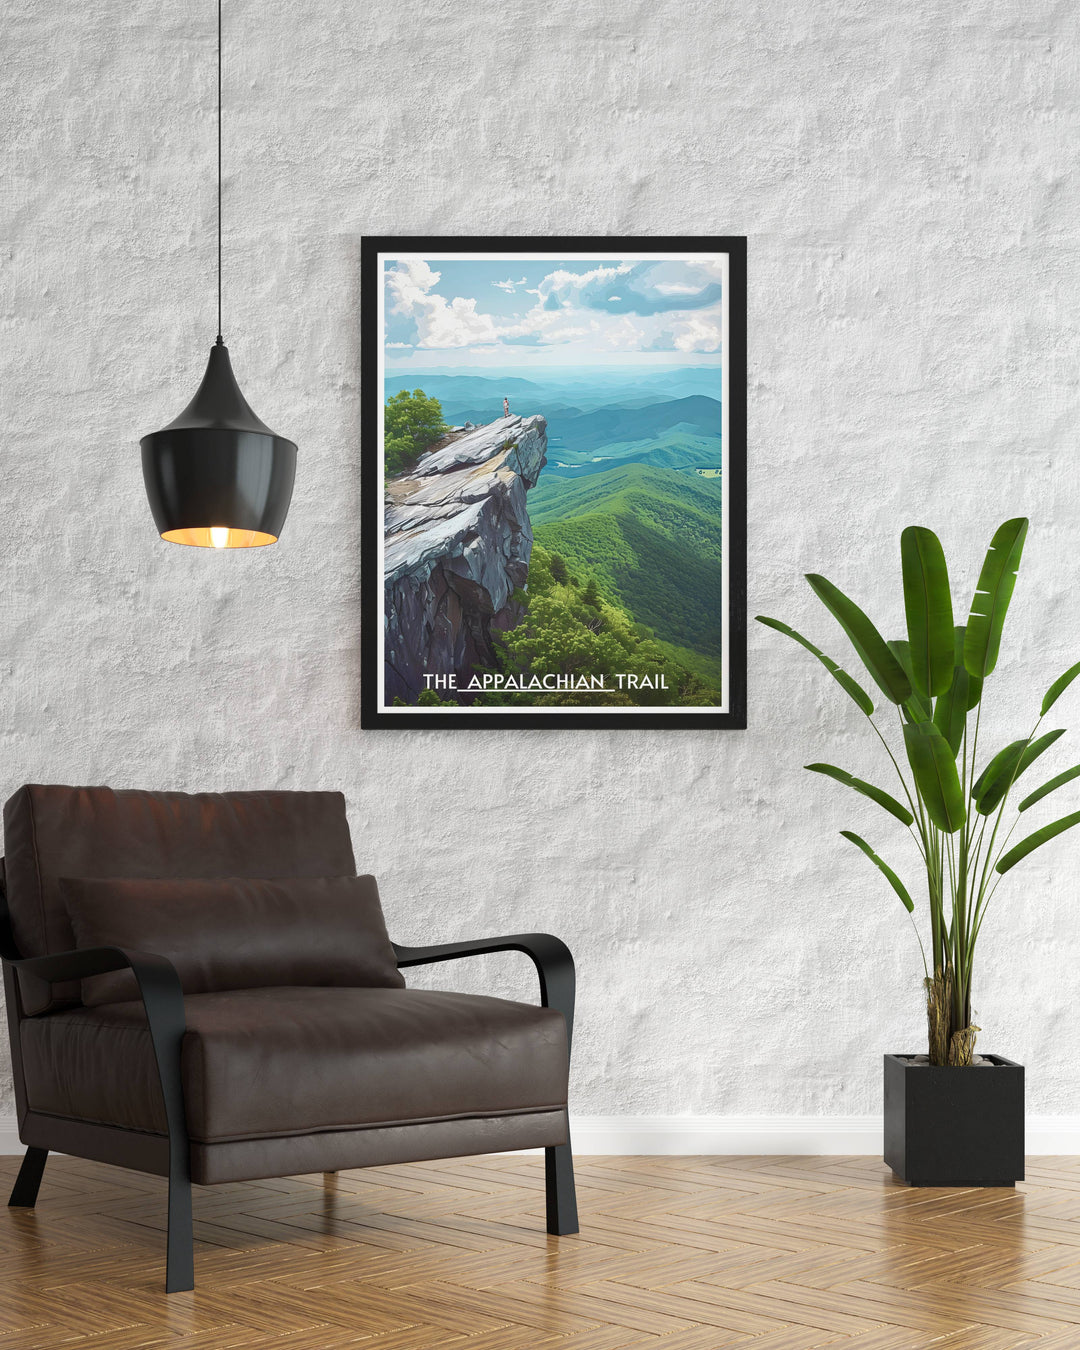 Artistic rendition of Mcafee Knob at dawn, highlighting the serene beauty of the Appalachian Trail, suitable for any room.